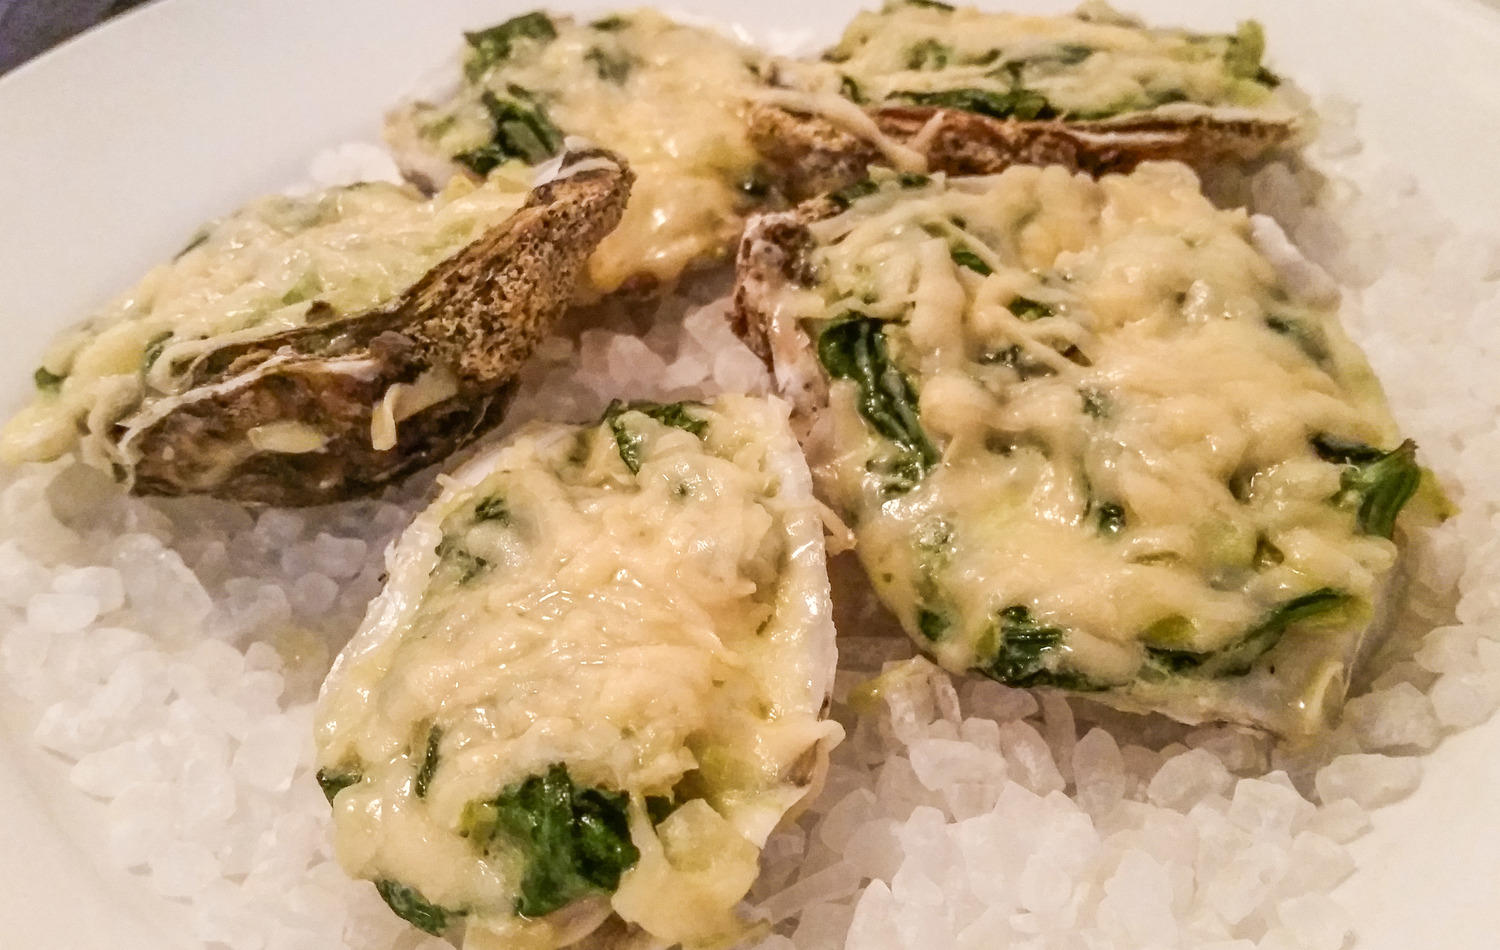 Oysters Rockefeller - Creamed leeks, fennel, spinach, Pernod, and paramesan